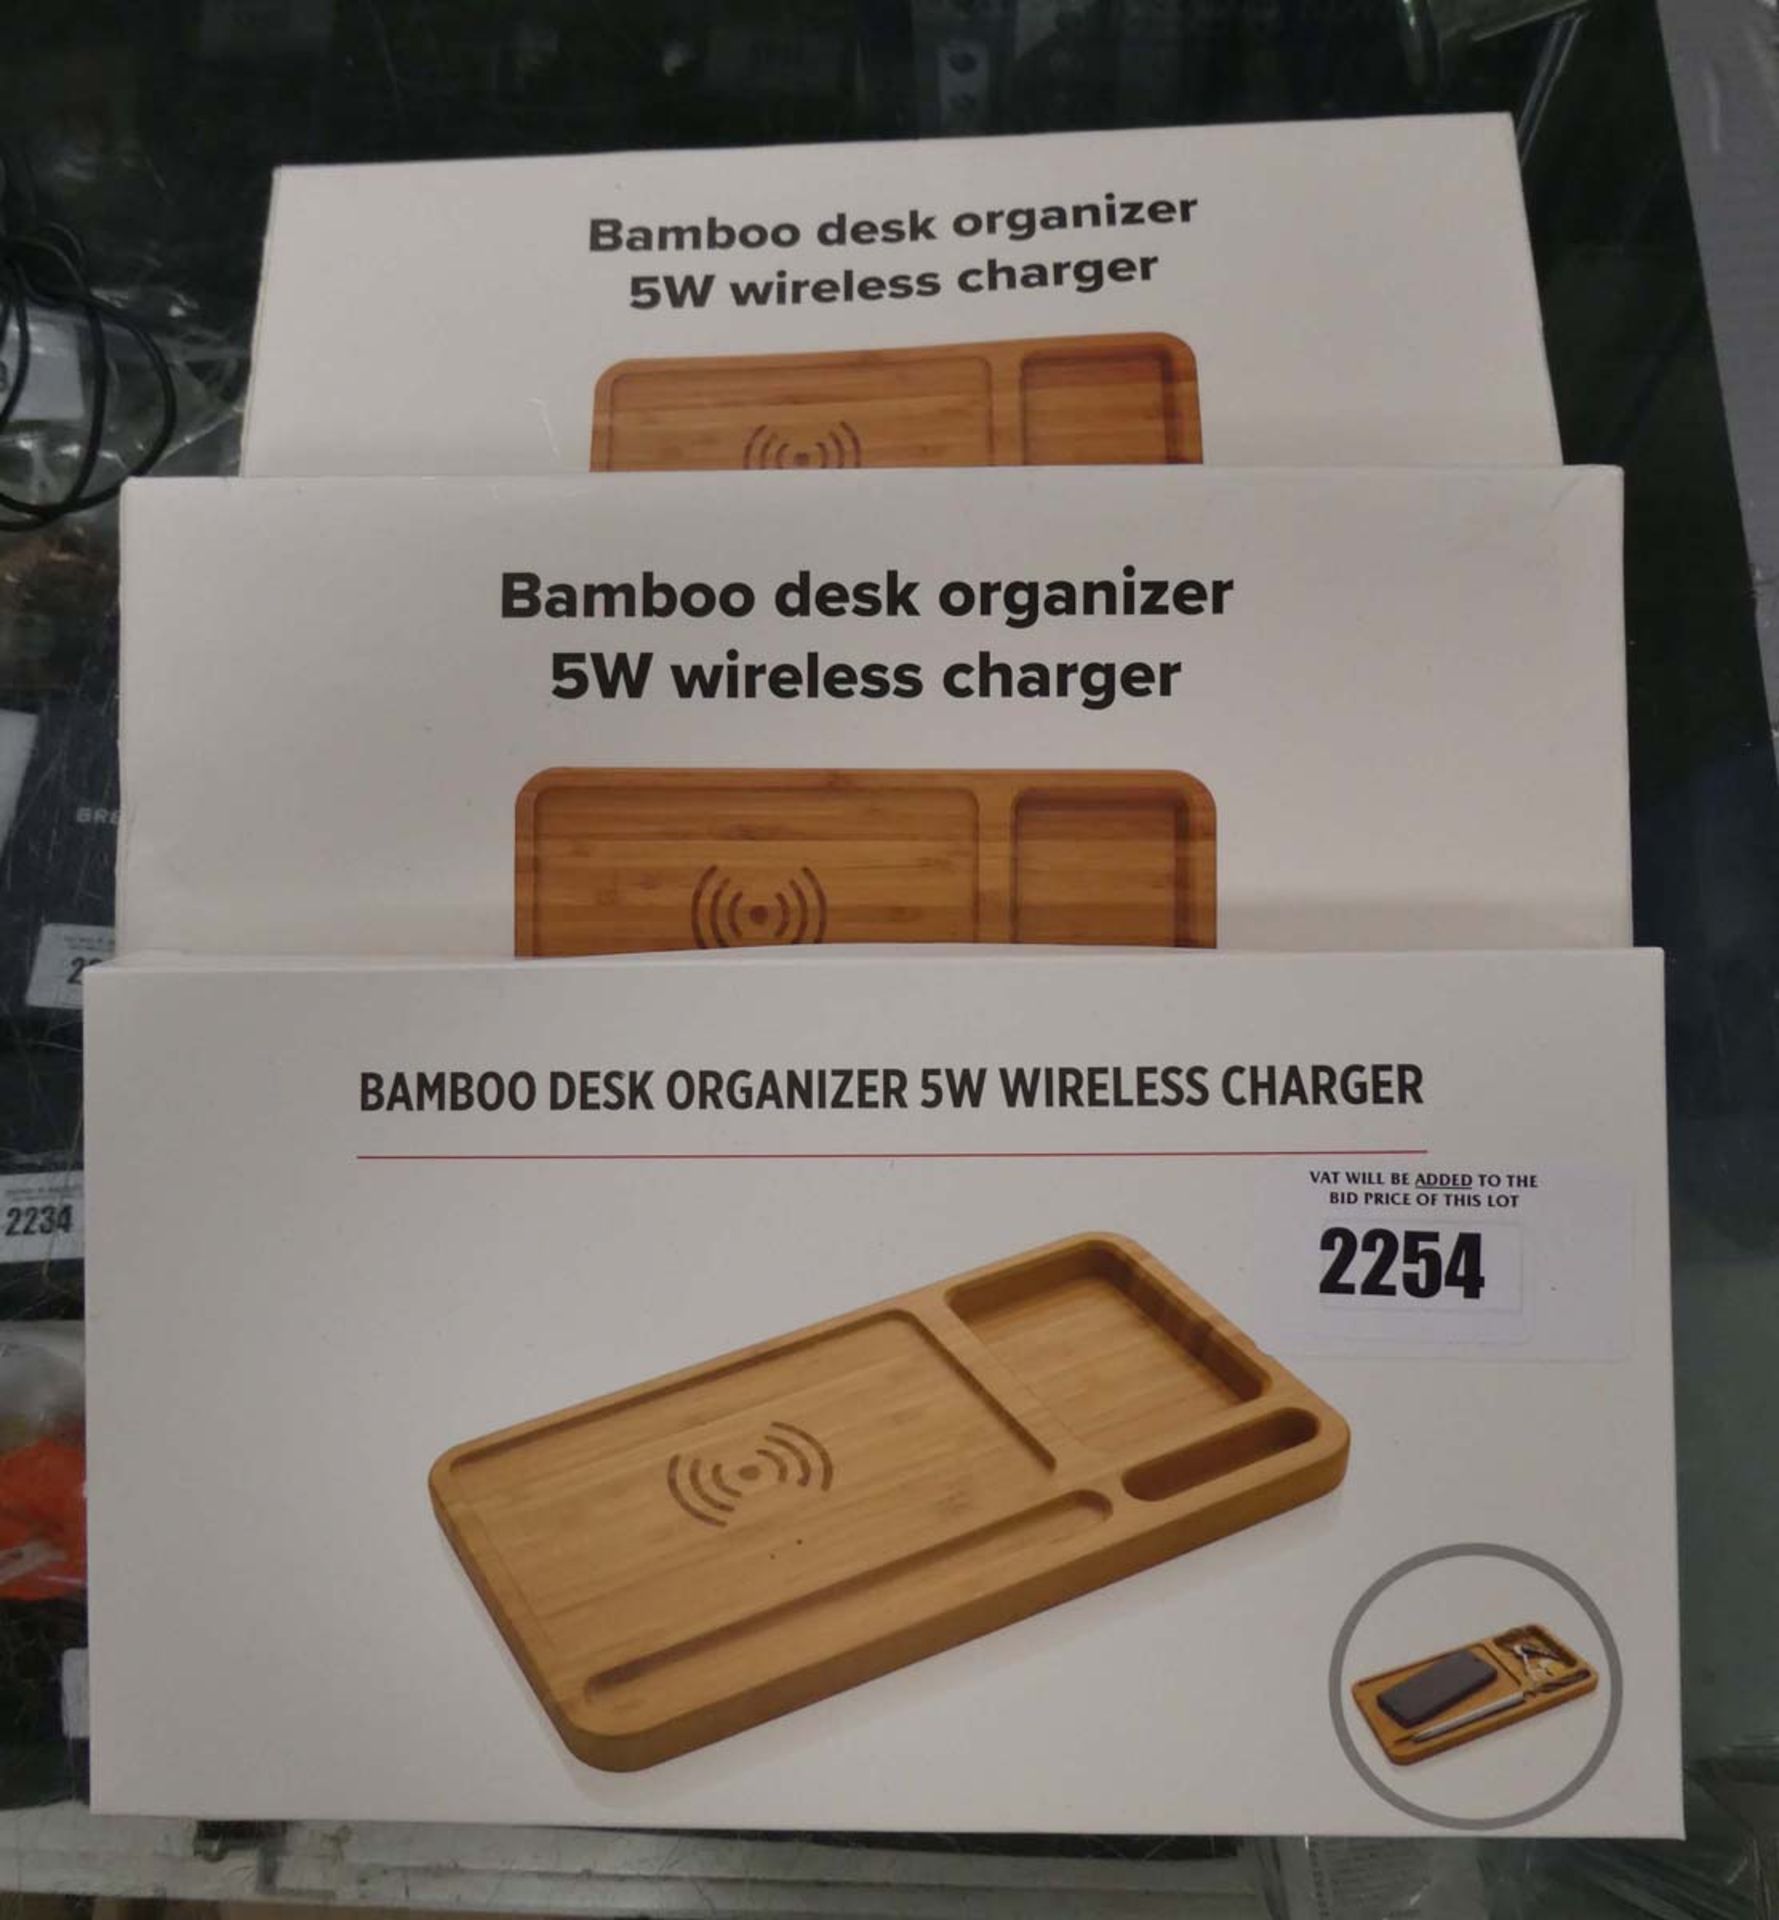 3x bamboo desk organisers with wireless charging